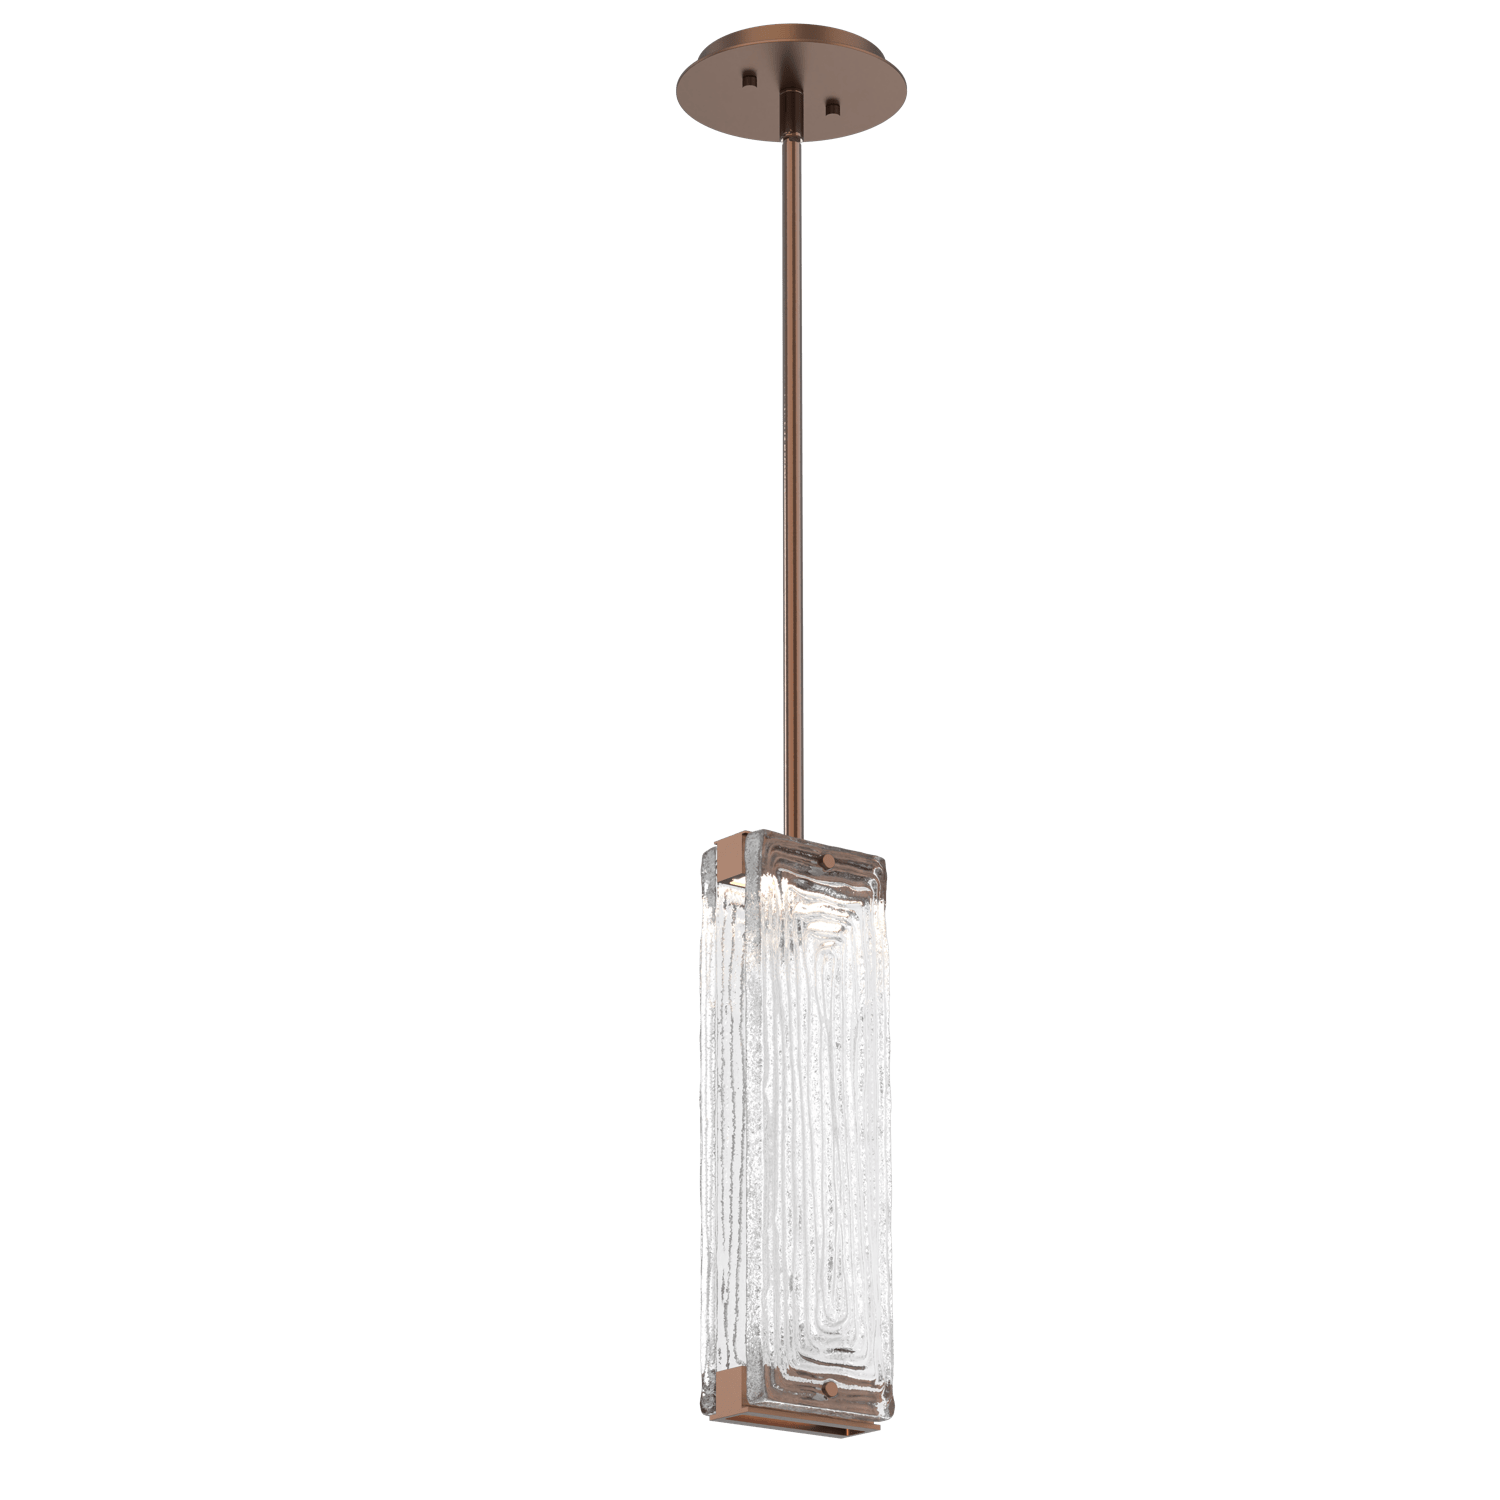 LAB0090-01-BB-TL-Hammerton-Studio-Tabulo-pendant-light-with-burnished-bronze-finish-and-clear-linea-cast-glass-shade-and-LED-lamping